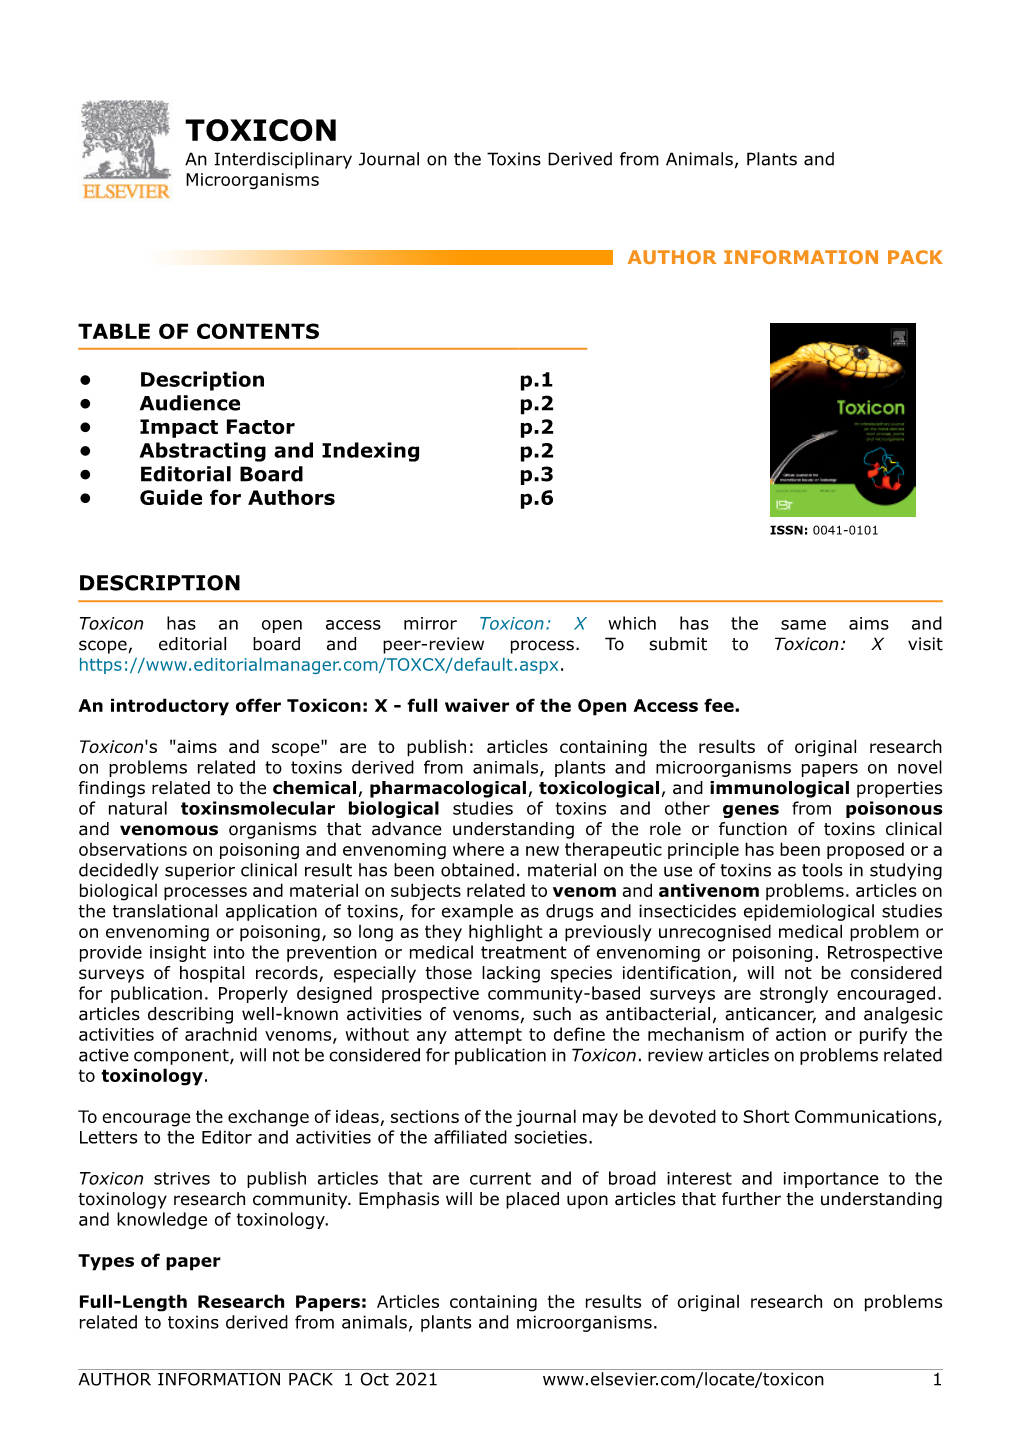 TOXICON an Interdisciplinary Journal on the Toxins Derived from Animals, Plants and Microorganisms